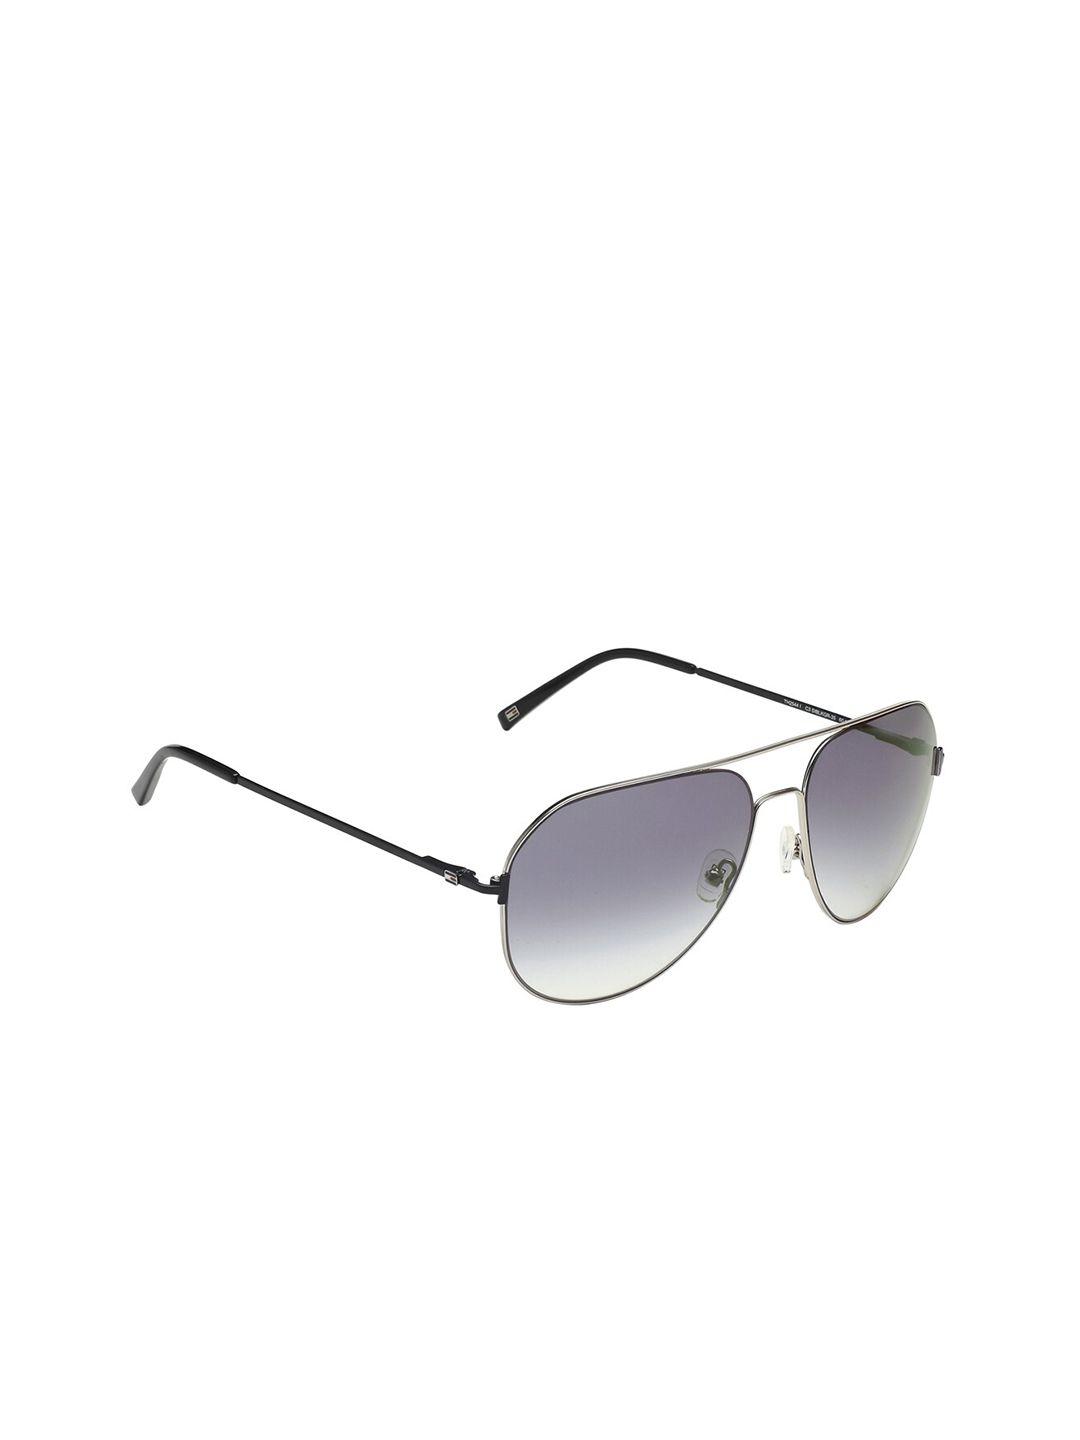 tommy hilfiger aviator sunglasses with uv protected lens - 2544 i siblkgr 35 c3 60 s